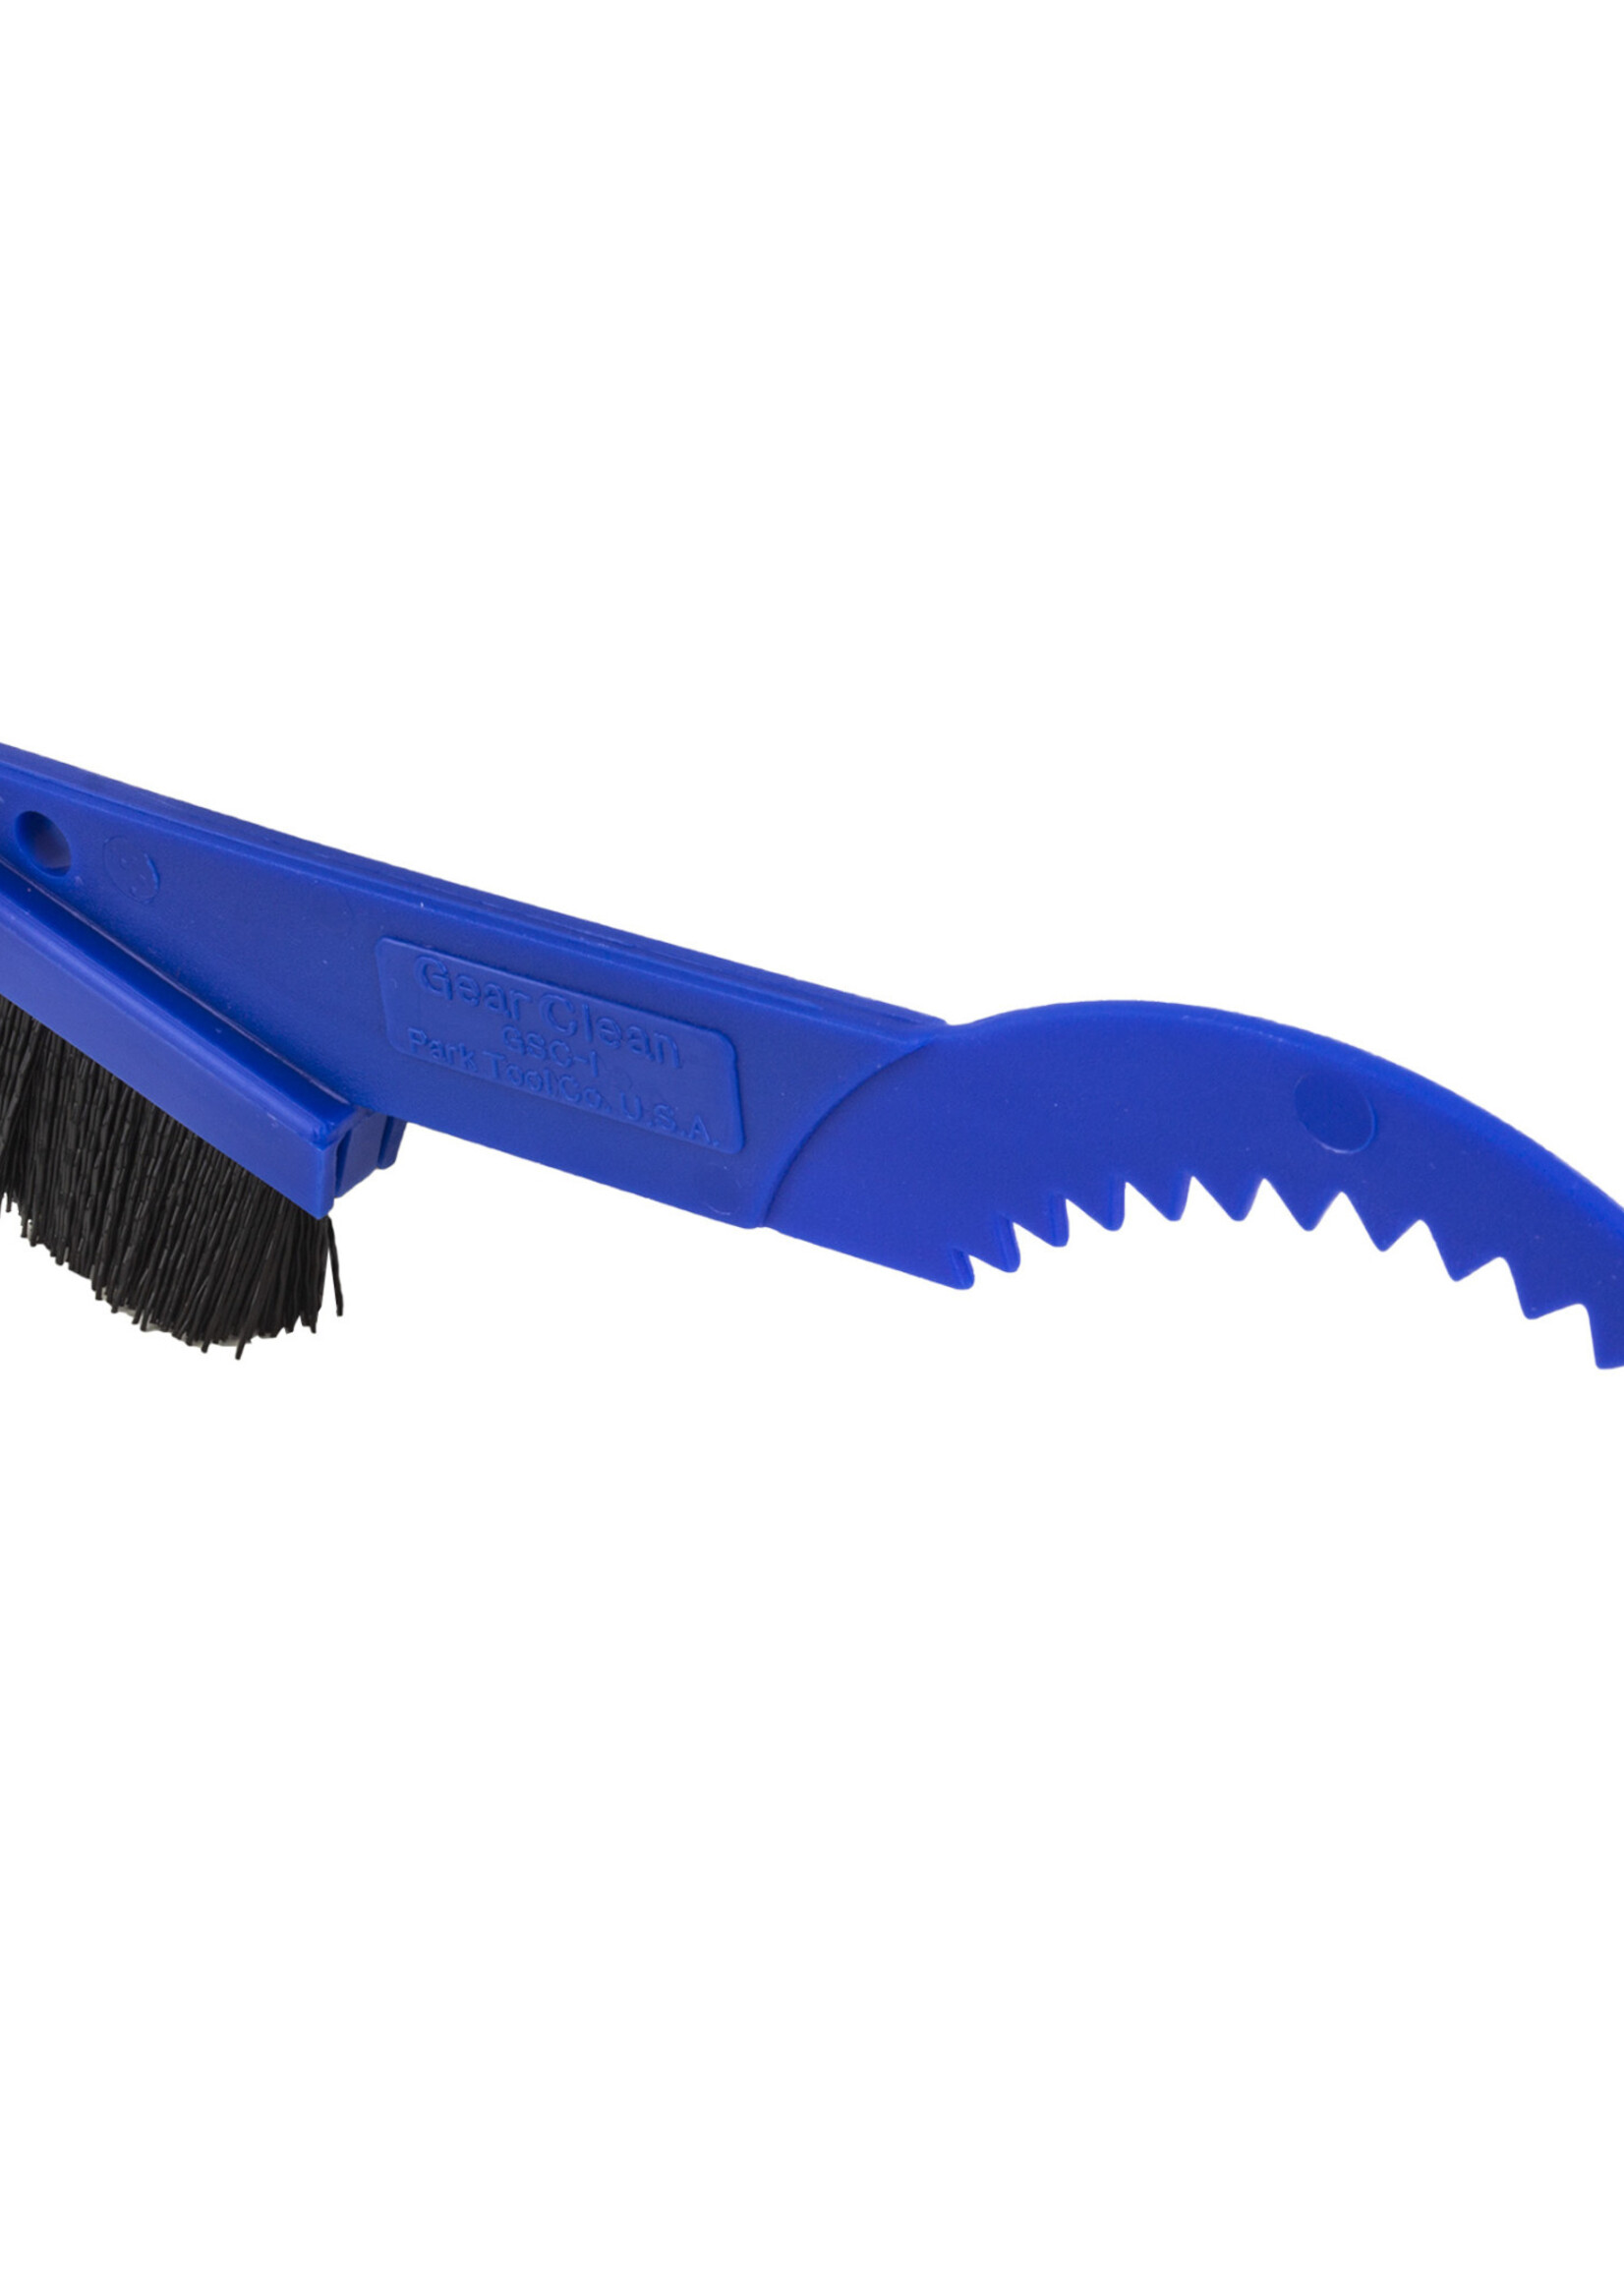 PARK TOOL TOOL F-W CLEANER PARK GSC-1 BRUSH